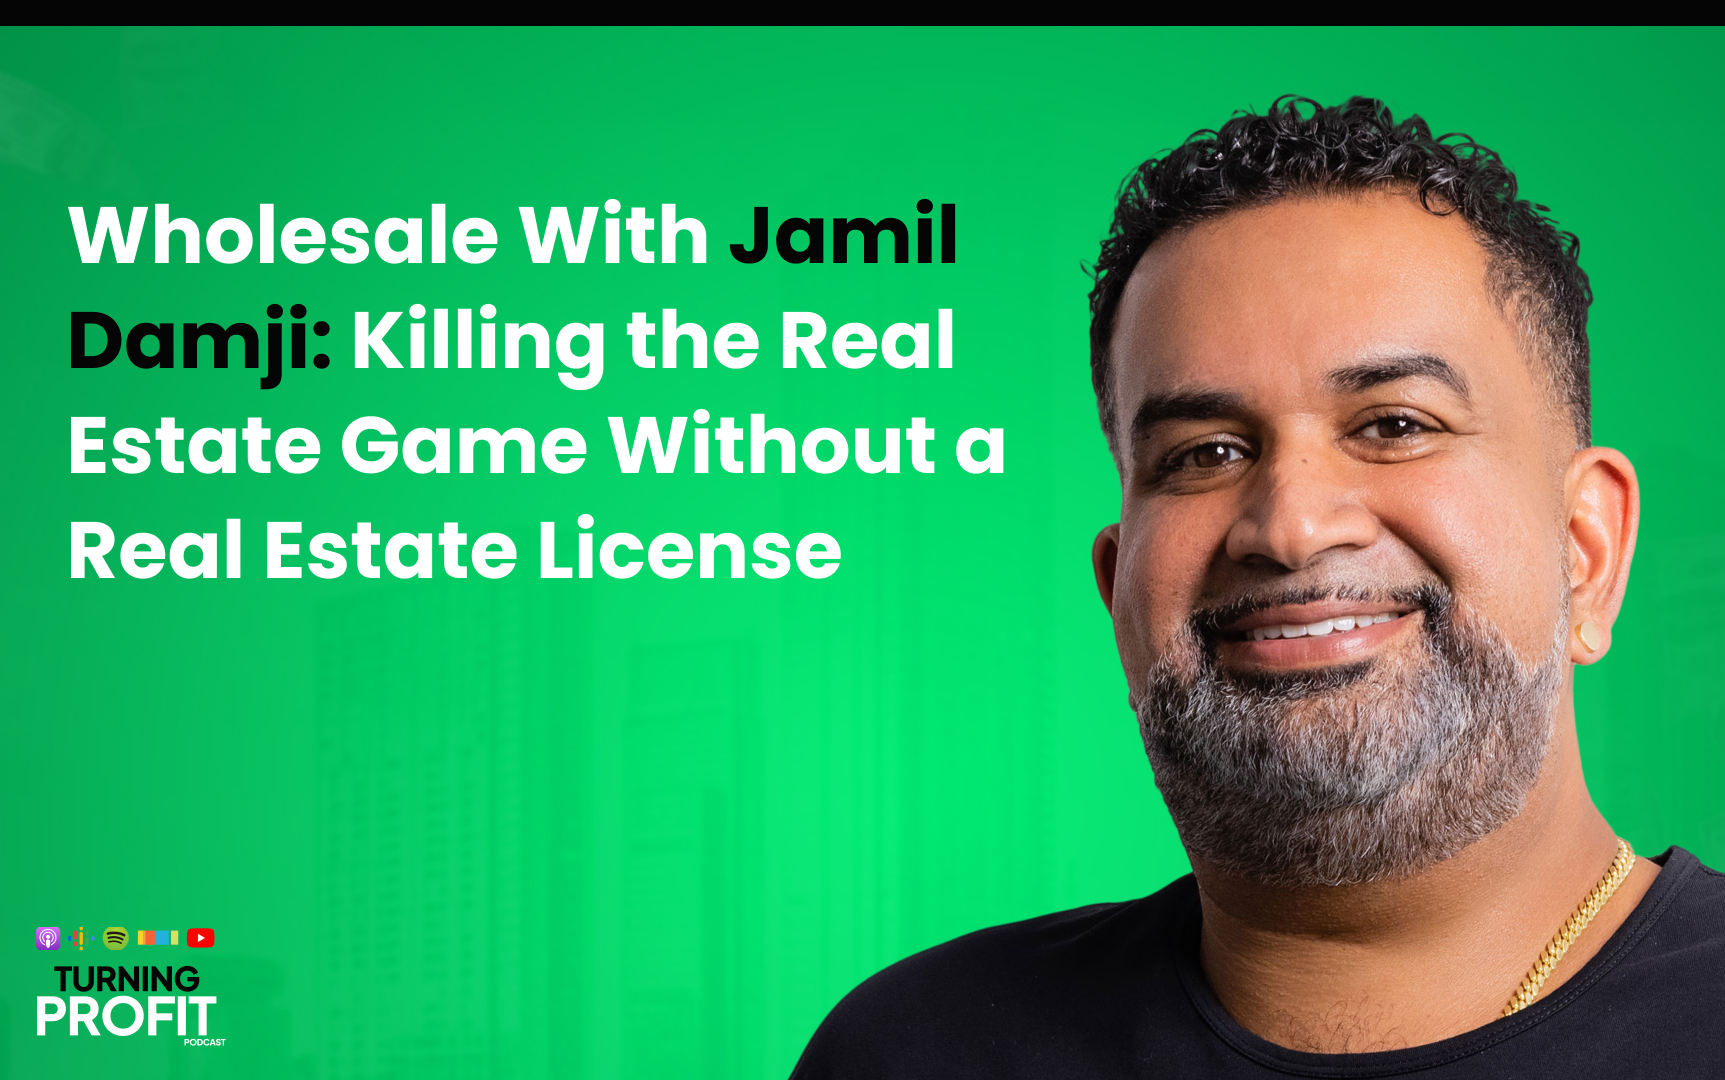 Wholesale With Jamil Damji: Killing the Real Estate Game Without a Real Estate License